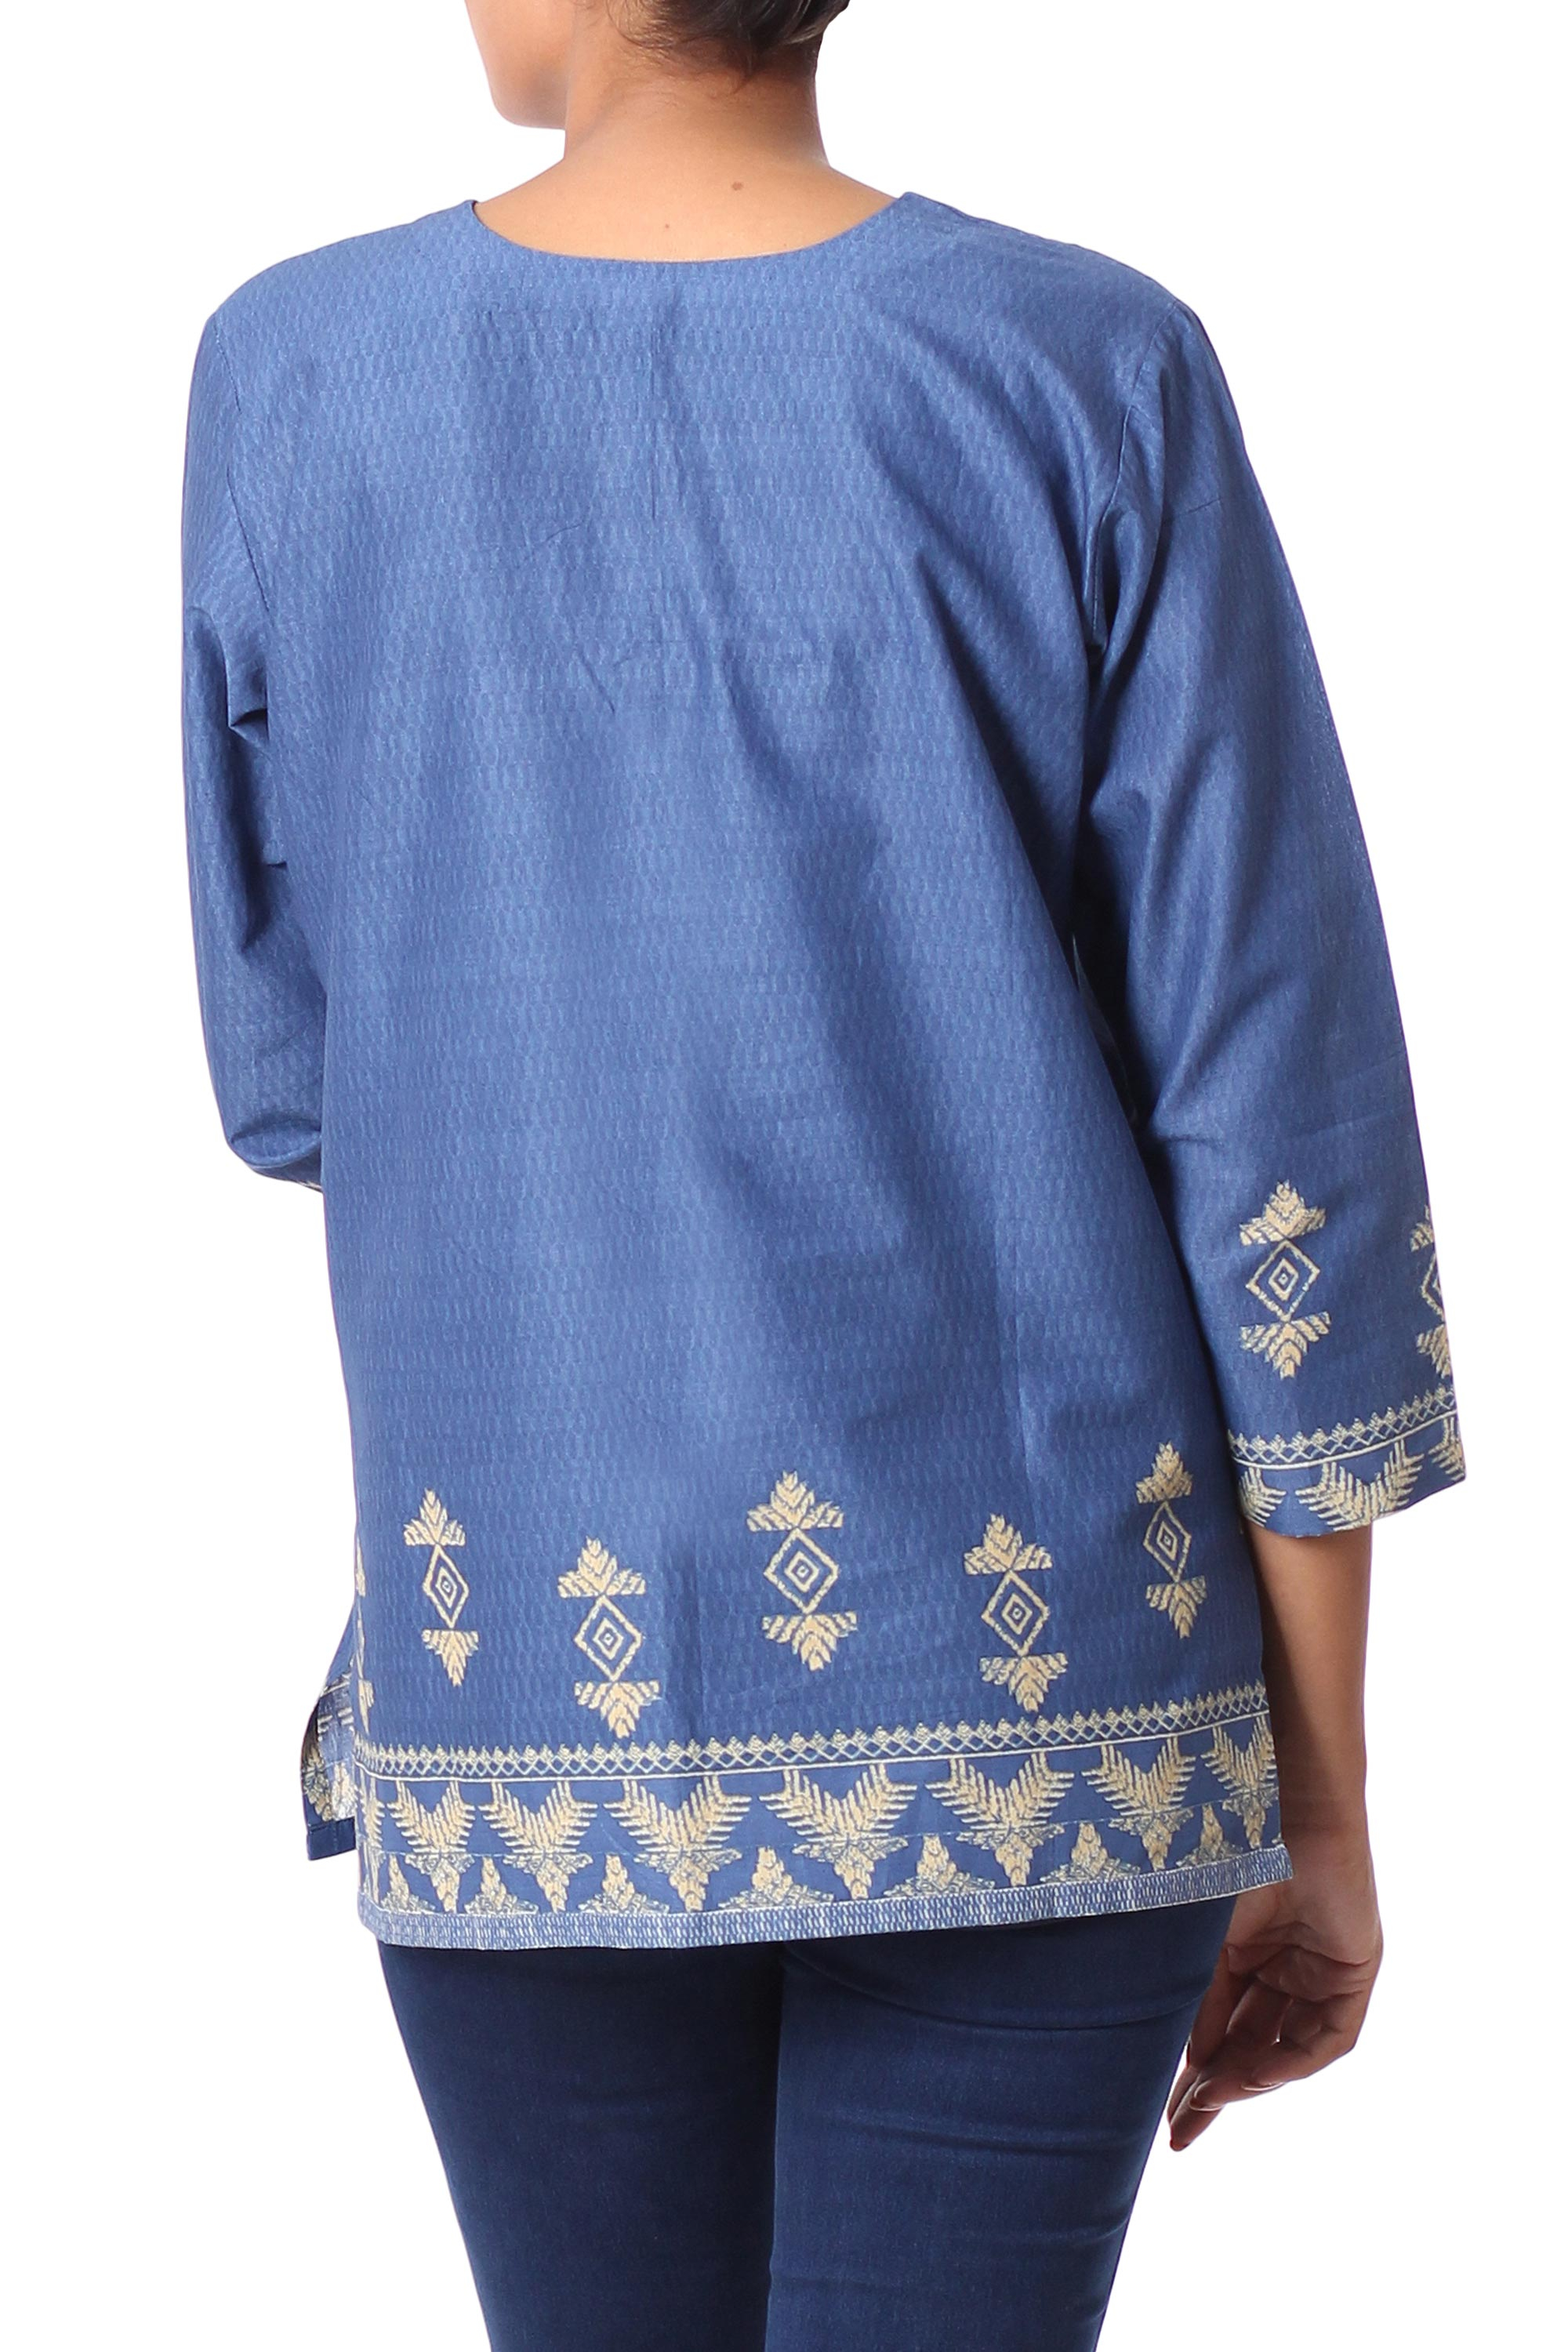 UNICEF Market | Steel Blue Cotton Tunic with Traditional Wheat Motif ...